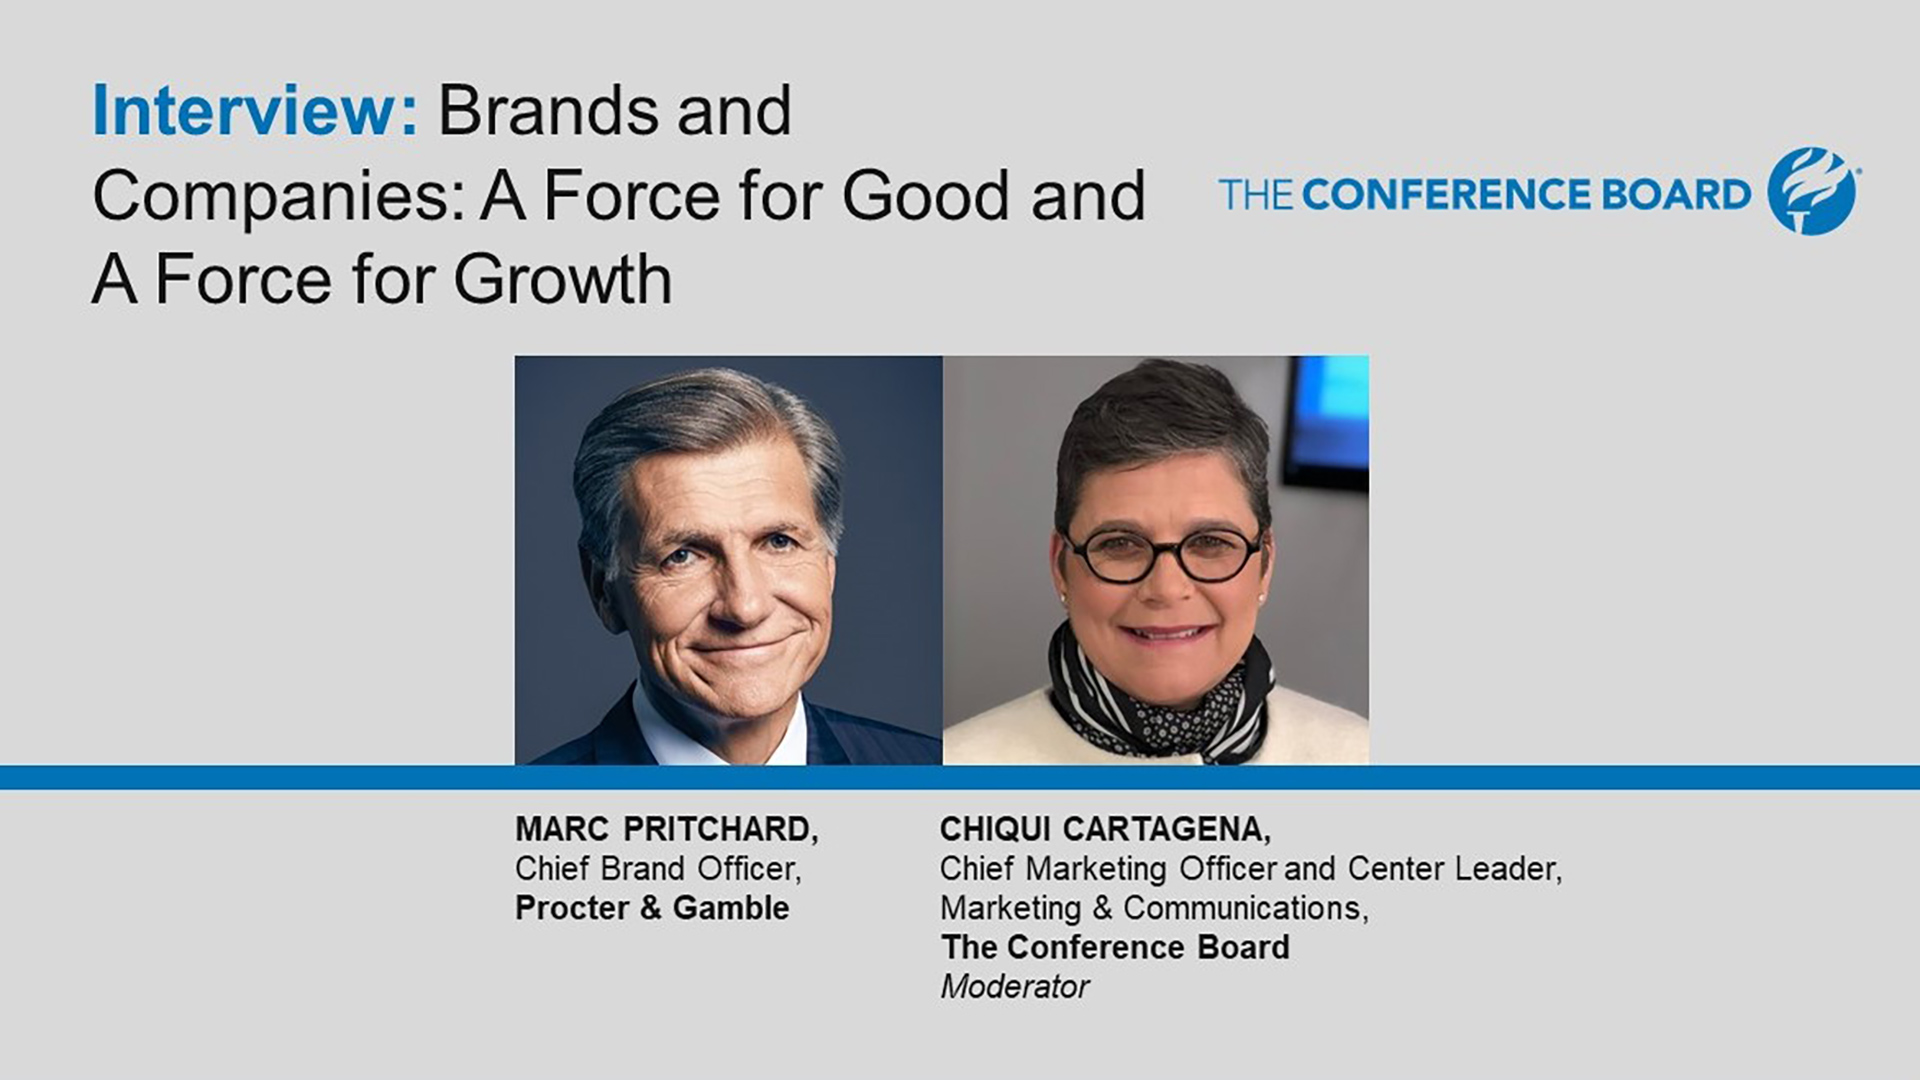 Building a More Civil & Just Society: Session D - Brands and Companies: A Force for Good and A Force for Growth. 31 Mins